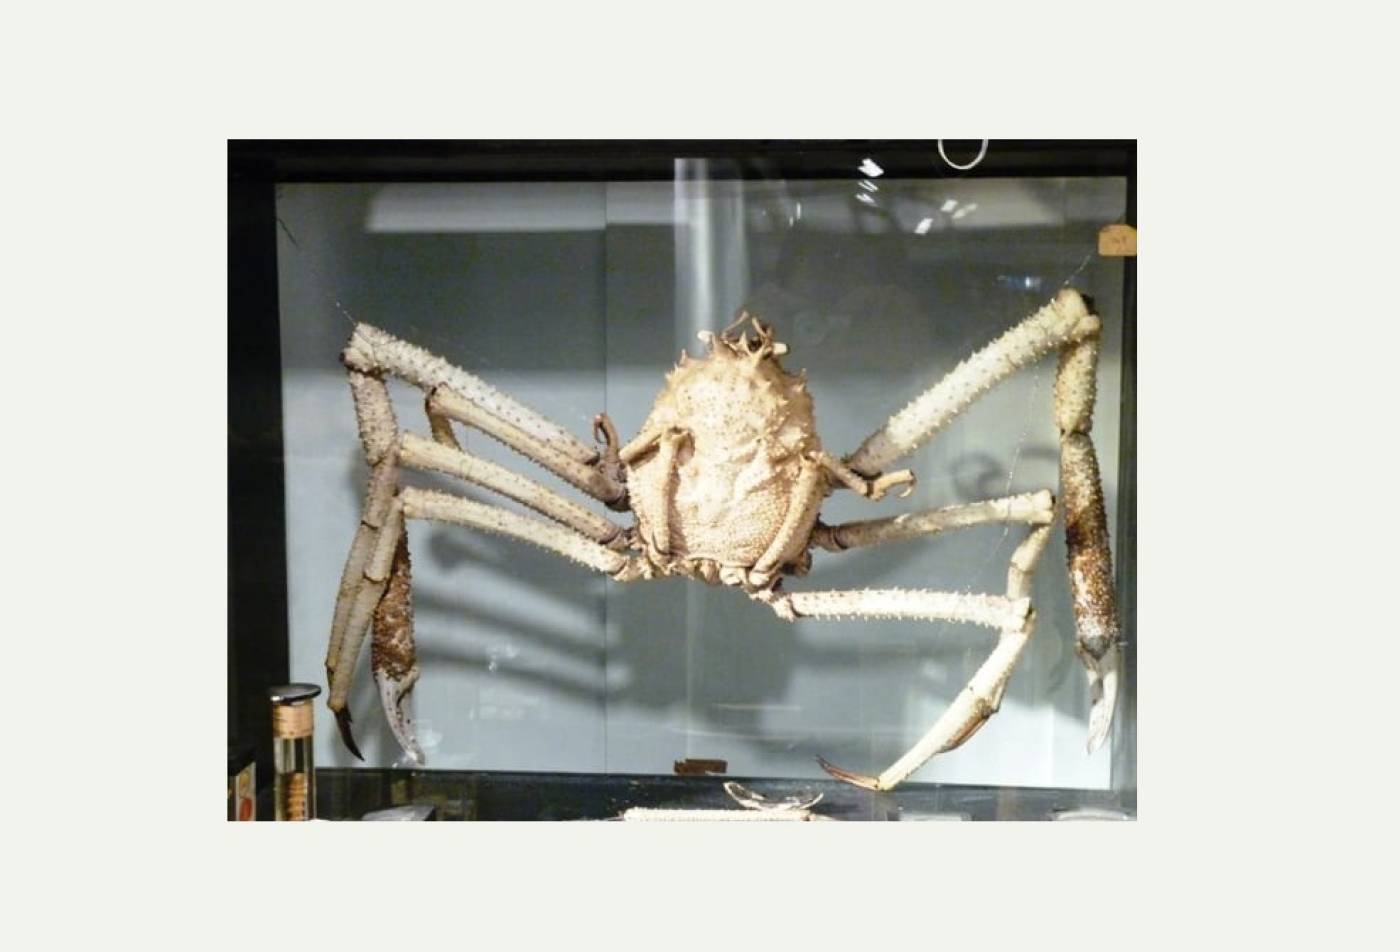 2 Japanese Spider Crab Culture Schools Projects Ucl University College London